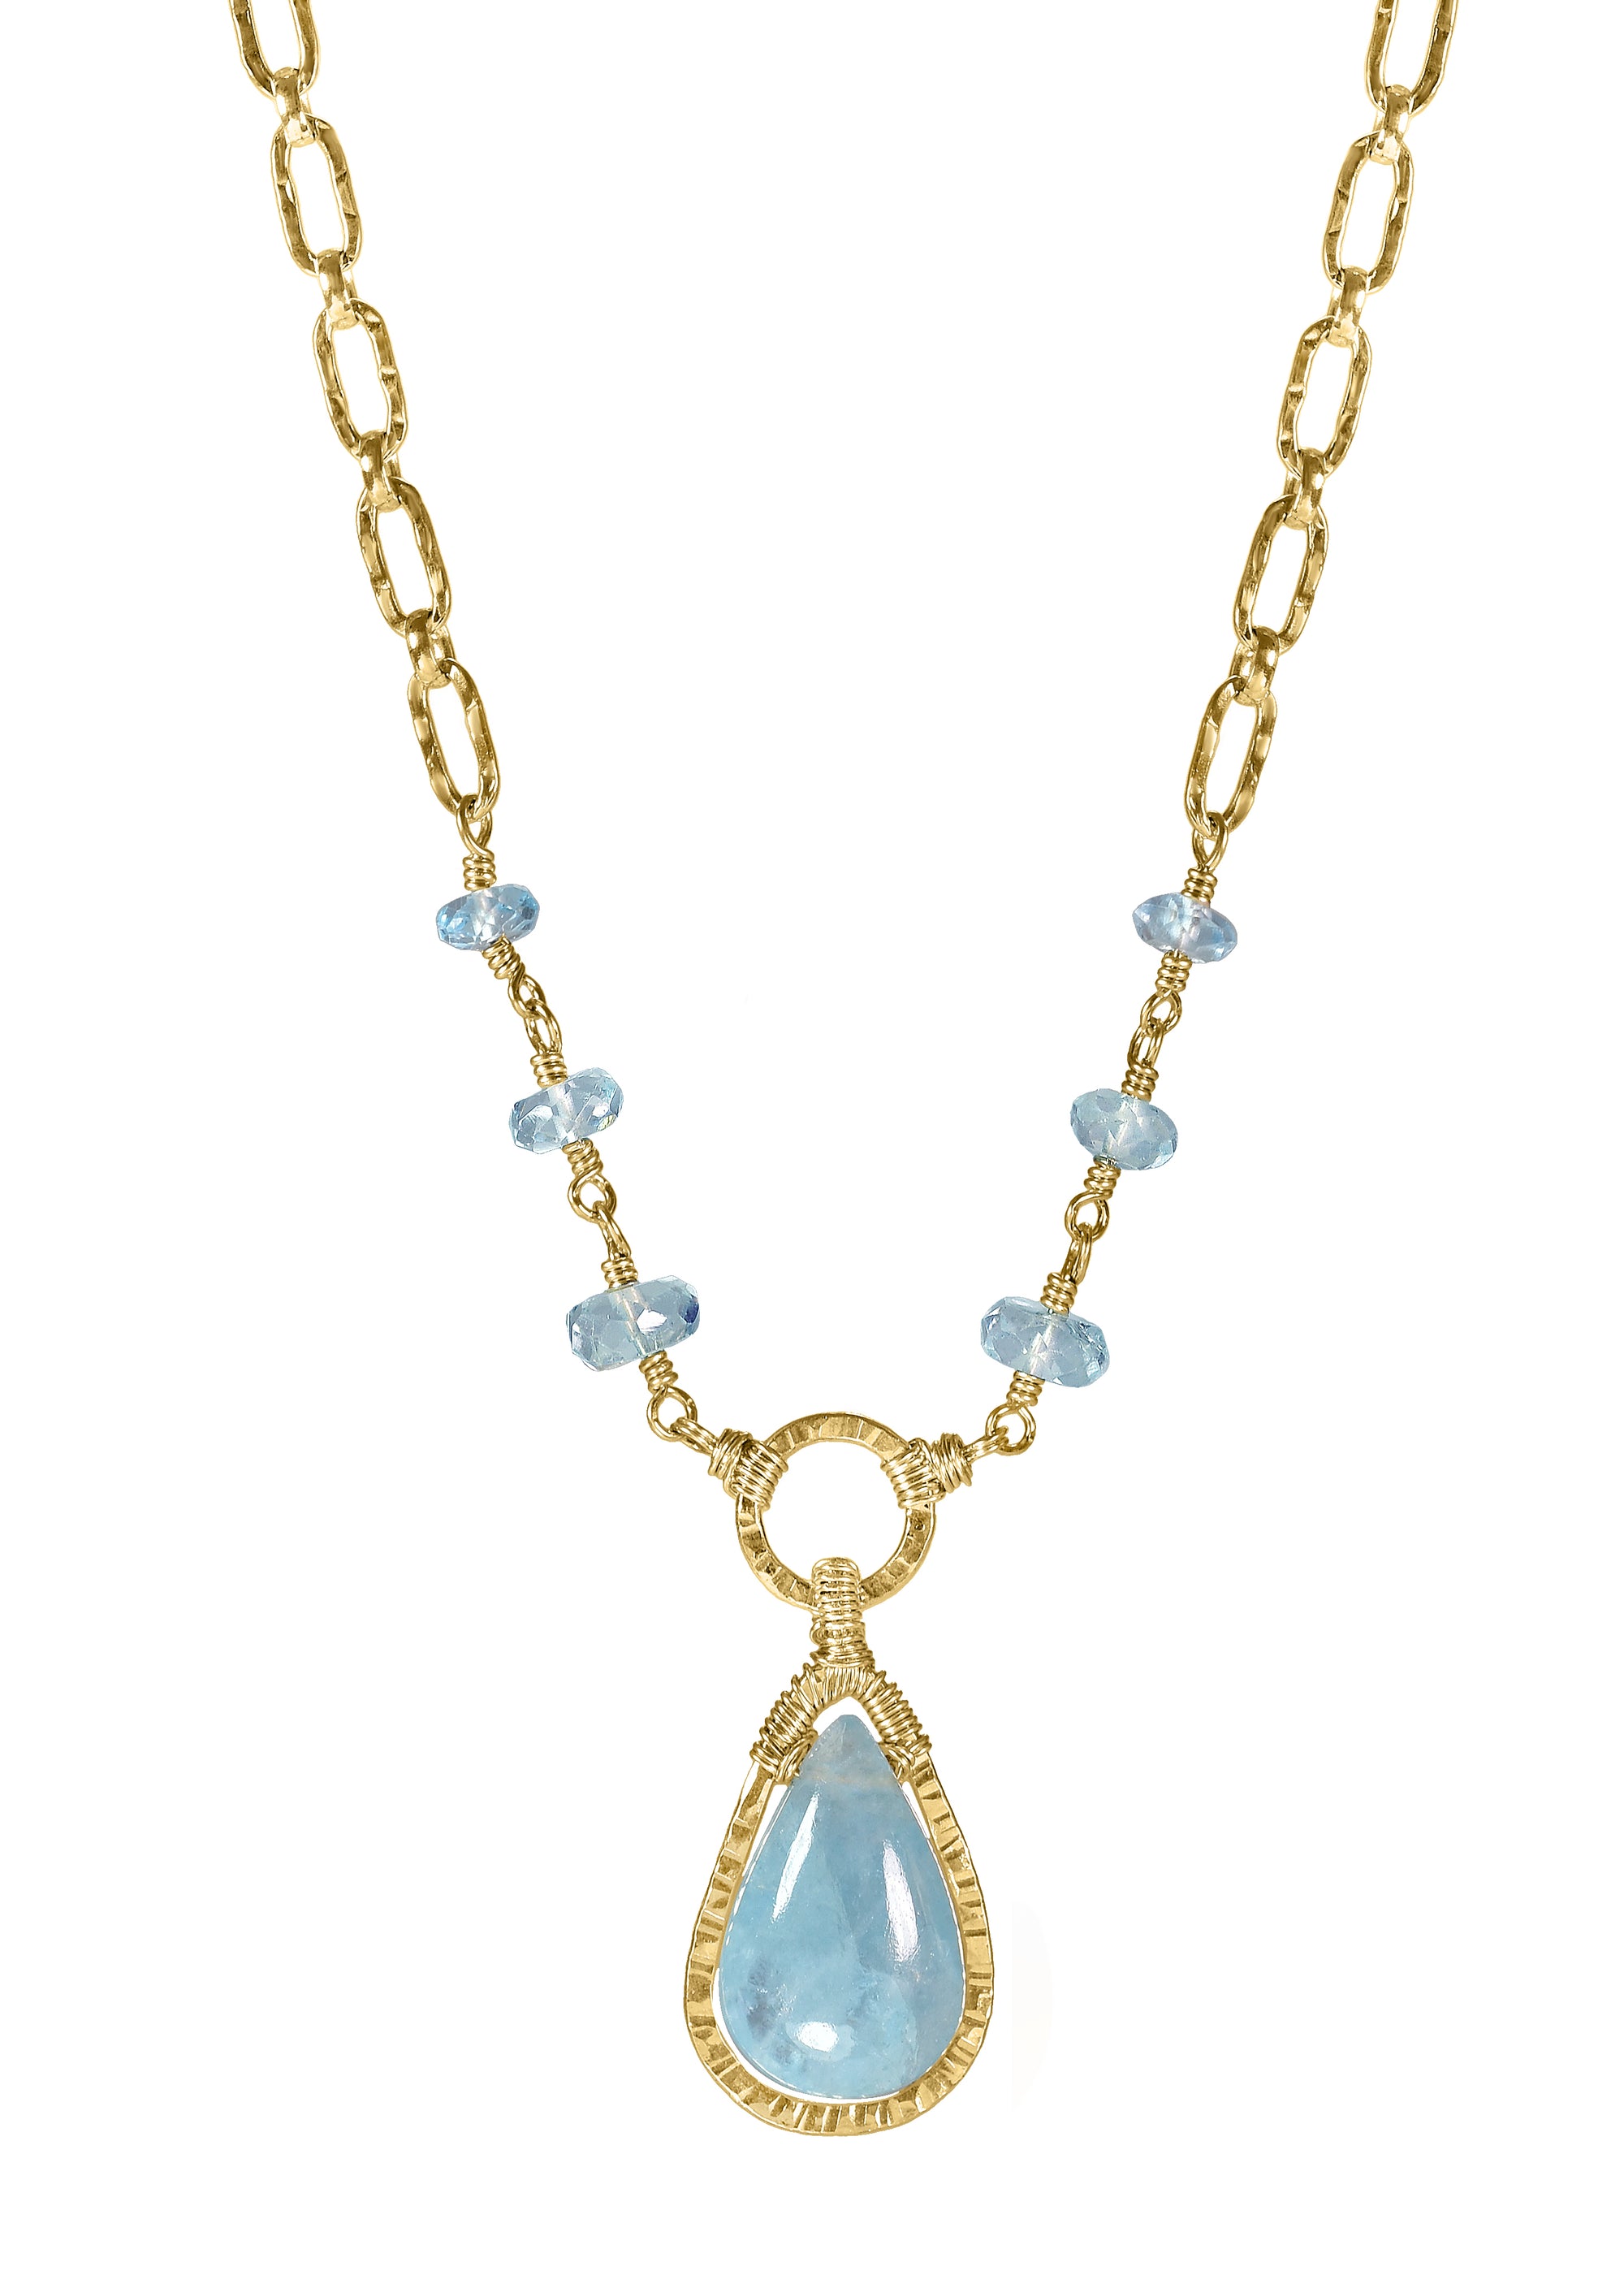 Aquamarine 14k gold fill Necklace measures 17-3/4" in length Pendant measures 3/4" in length and 3/8" in width at the widest point Handmade in our Los Angeles studio